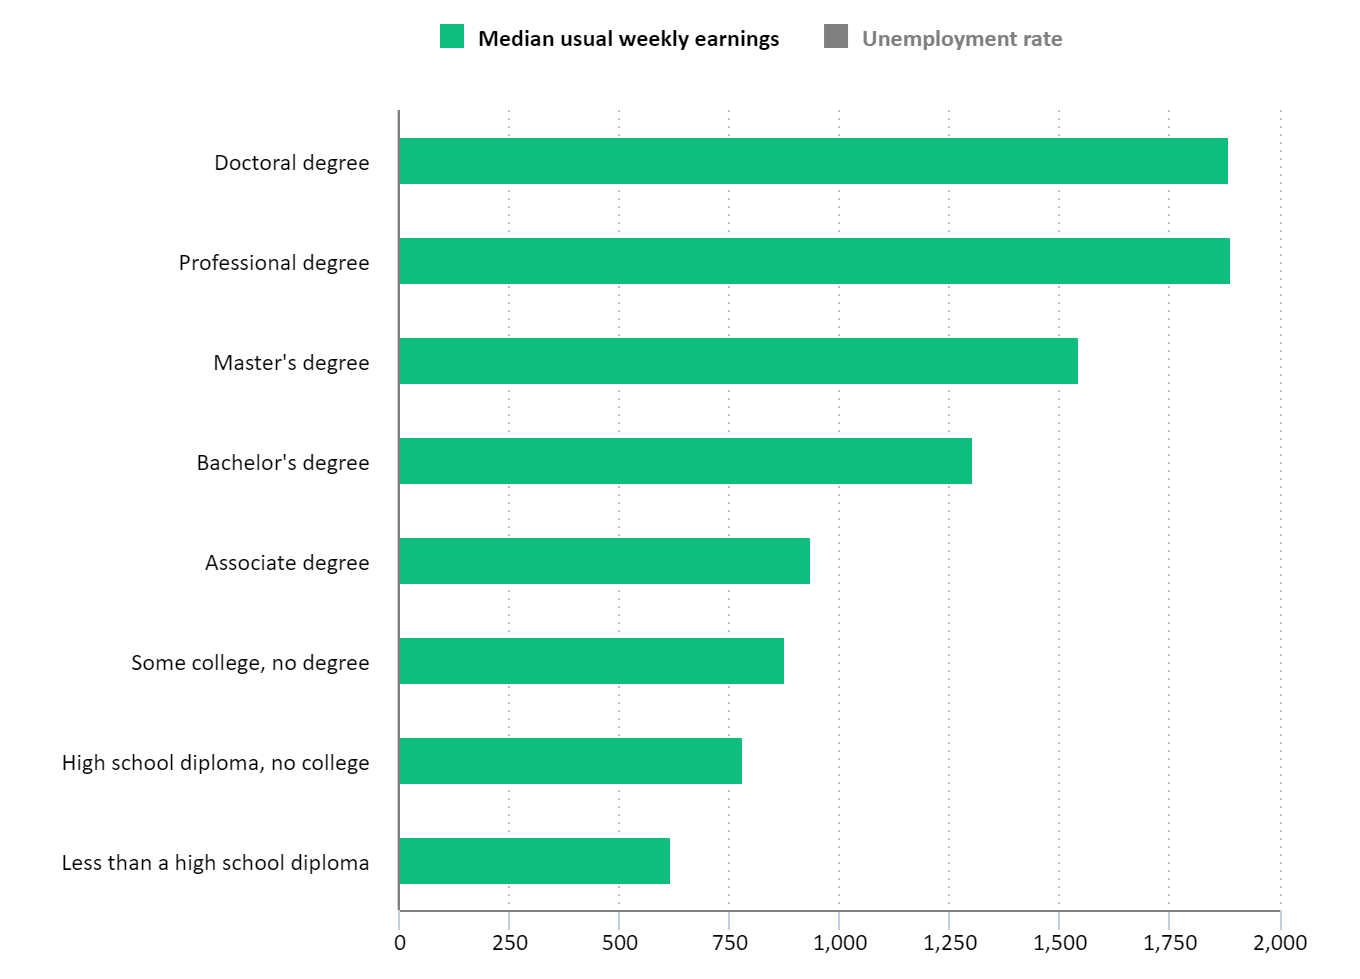 median weekly earnings by educational attainment; doctoral degree $1,885; professional degree $1,893; master's degree $1,545; bachelor's degree $1,305; associate degree $938; some college, no degree $877; high school diploma, no college $781; less than a high school diploma $619